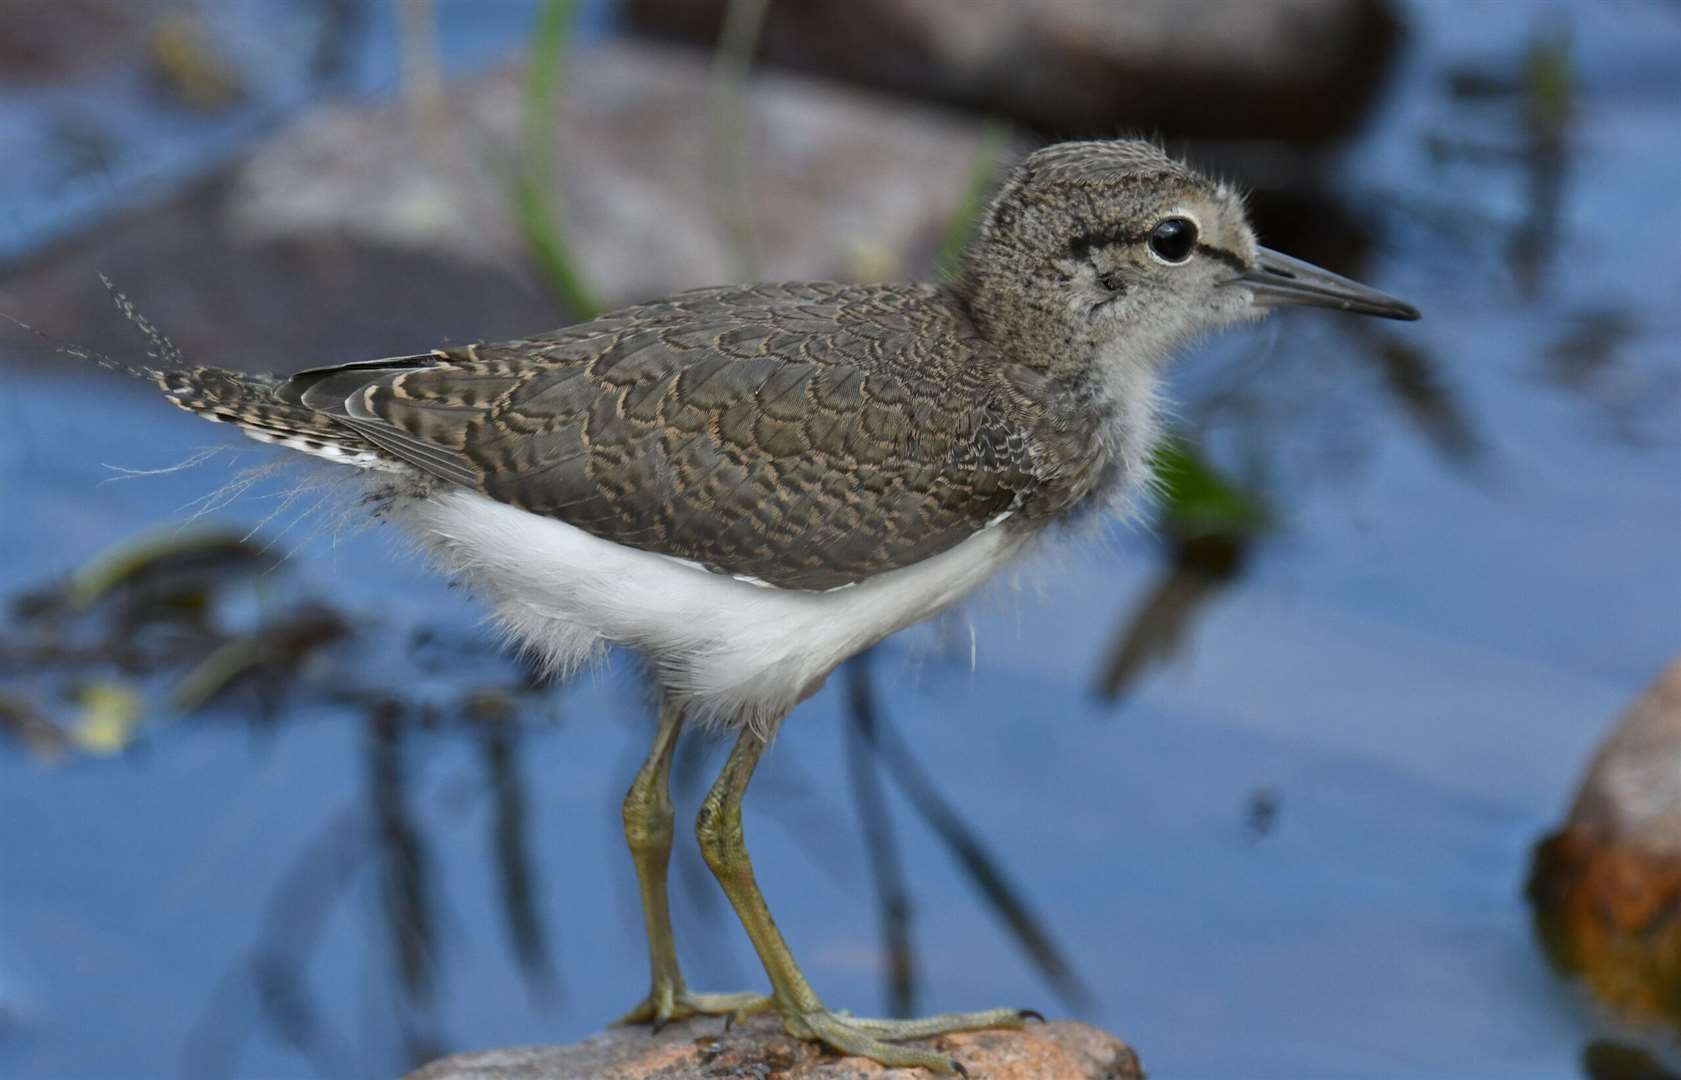 John Wright's picture of an infant common sandpiper was highly commended with the judge admiring the "great detail in the feathers".